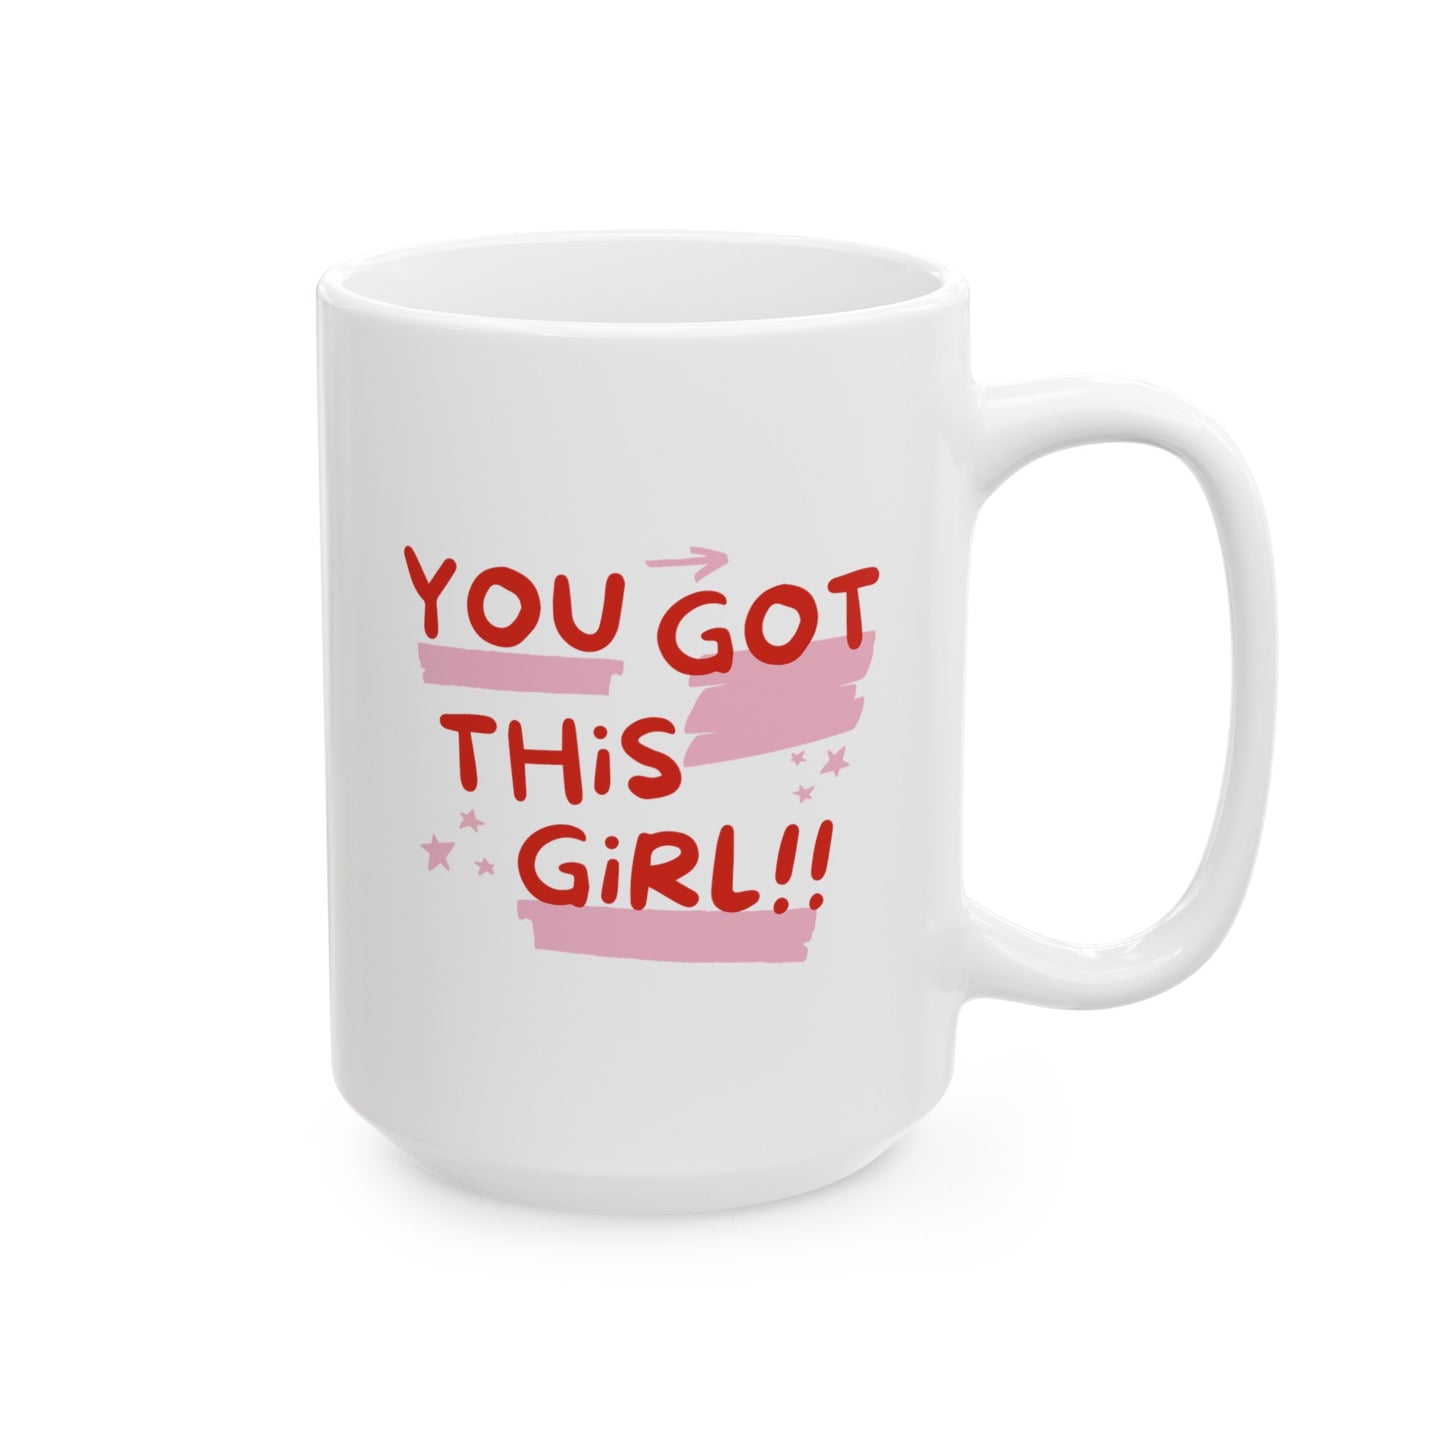 You Got This Girl 15oz white funny large coffee mug gift for BFF motivational positivity quote congratulations exam results friendship new job waveywares wavey wares wavywares wavy wares